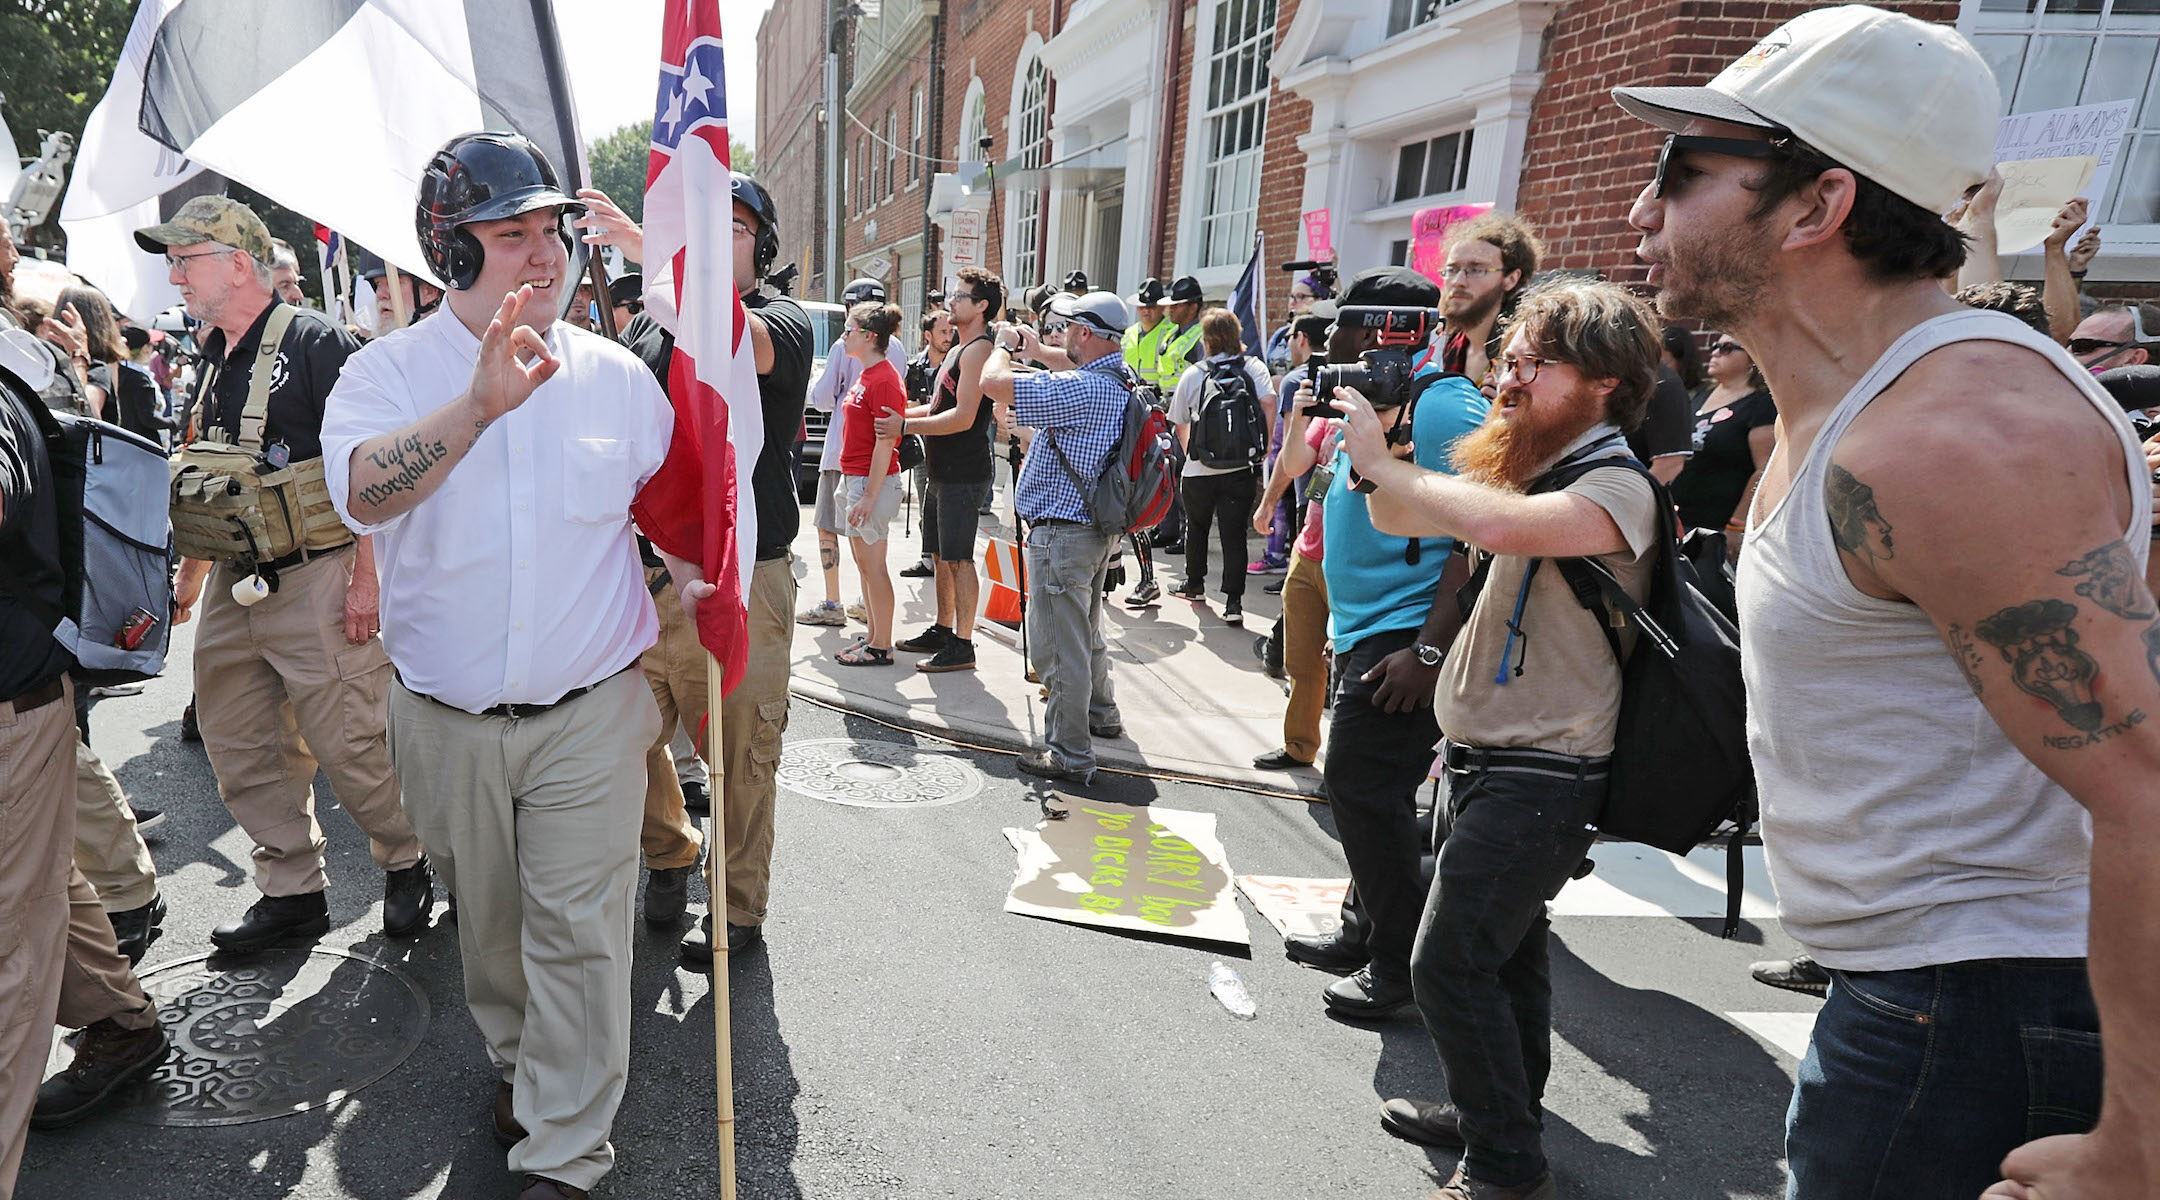 Far-right activists and counterprotesters clash at the "Unite the Right" rally on August 12, 2017 in Charlottesville, Virginia. (Chip Somodevilla/Getty Images)